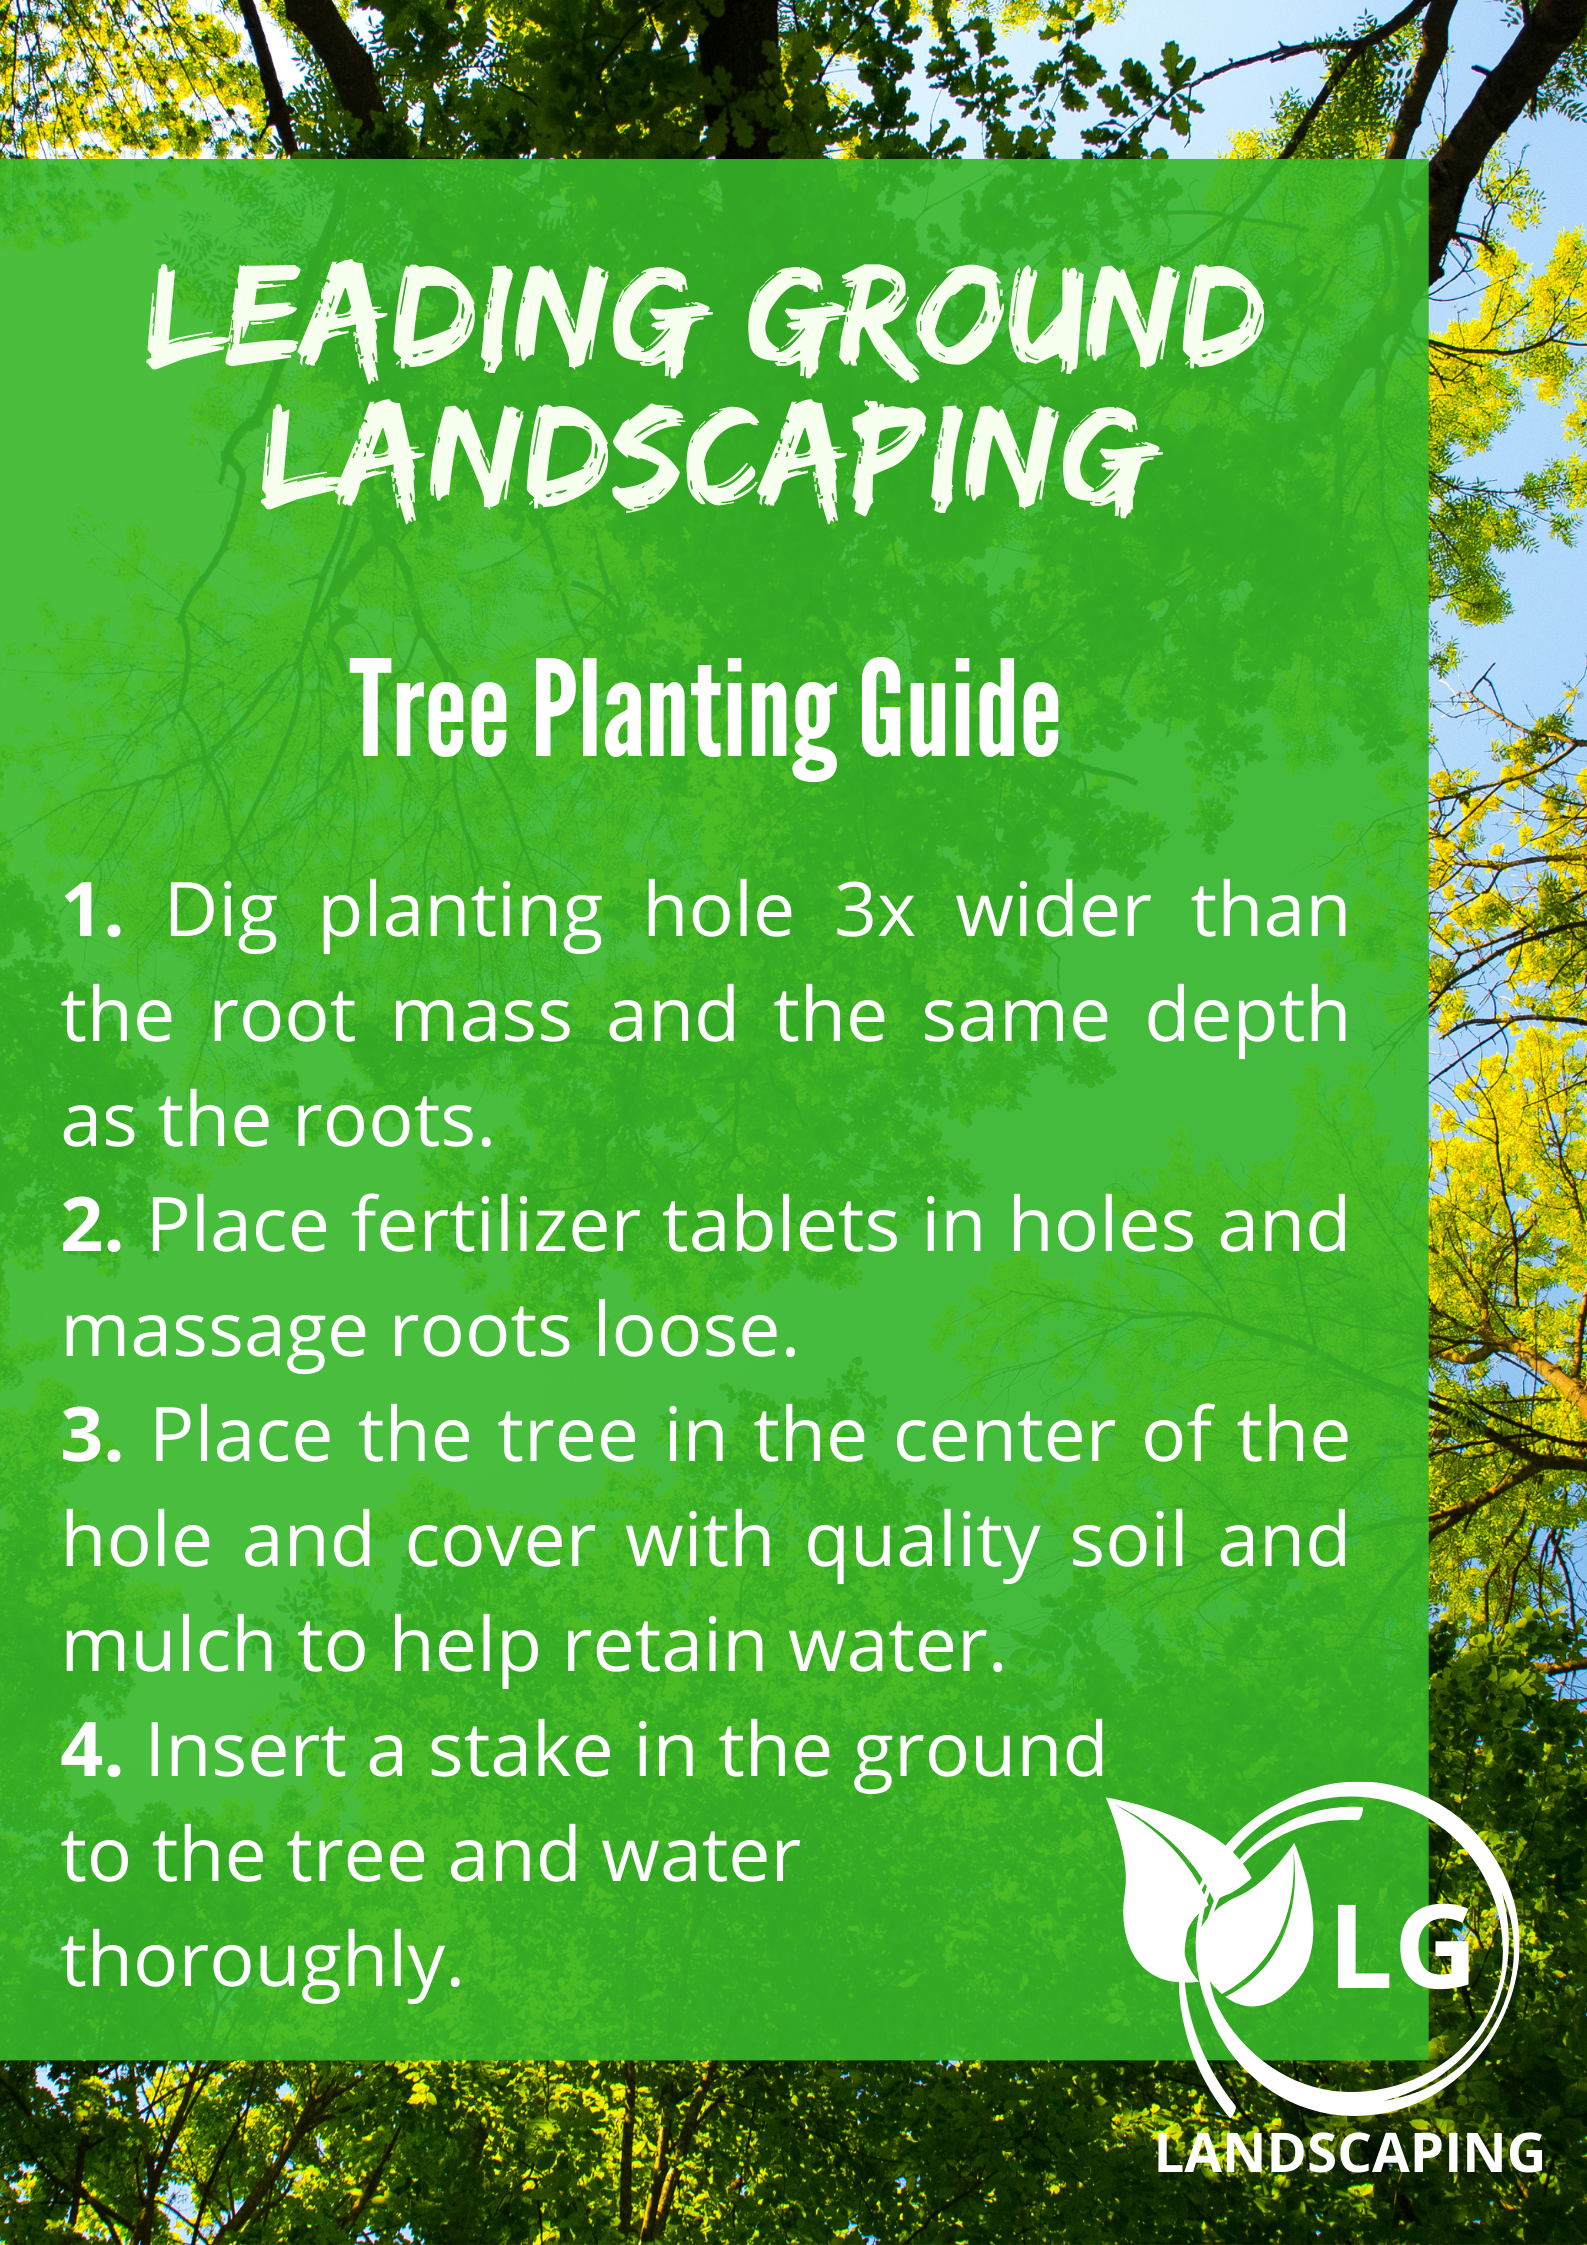 Tree Plating Guide